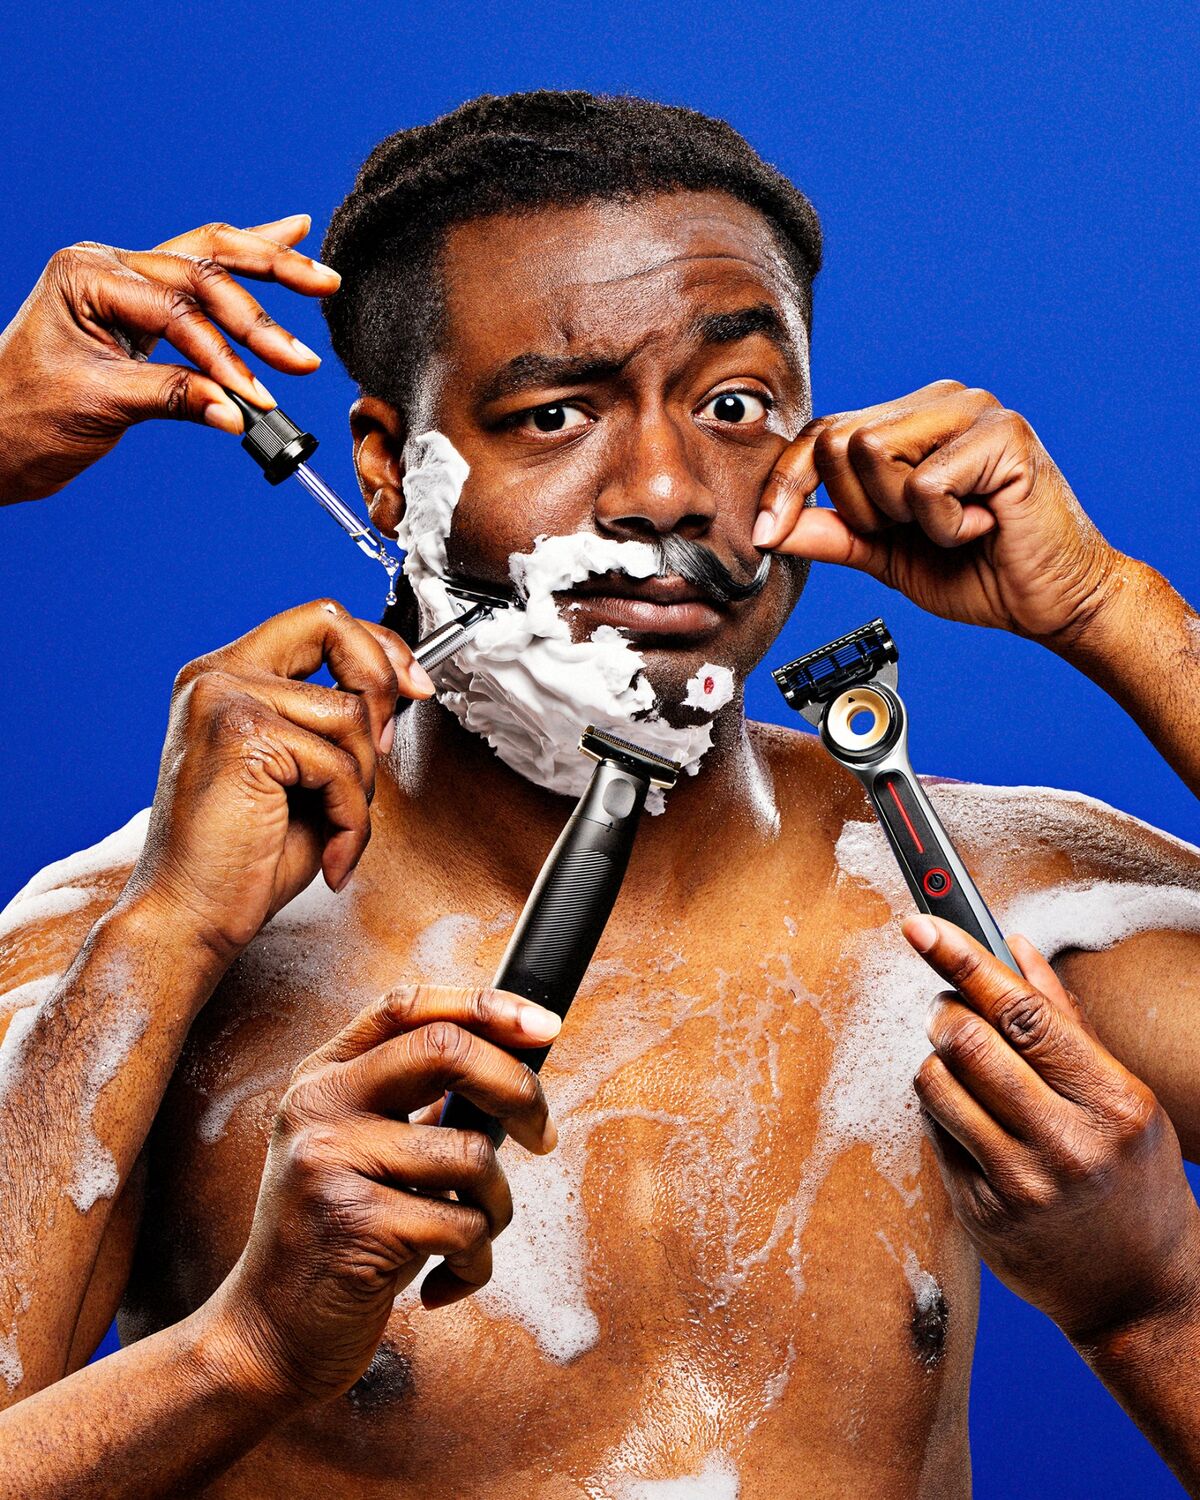 Grooming Products, Mustache Waxes Help Gillette Grow Sales - Bloomberg